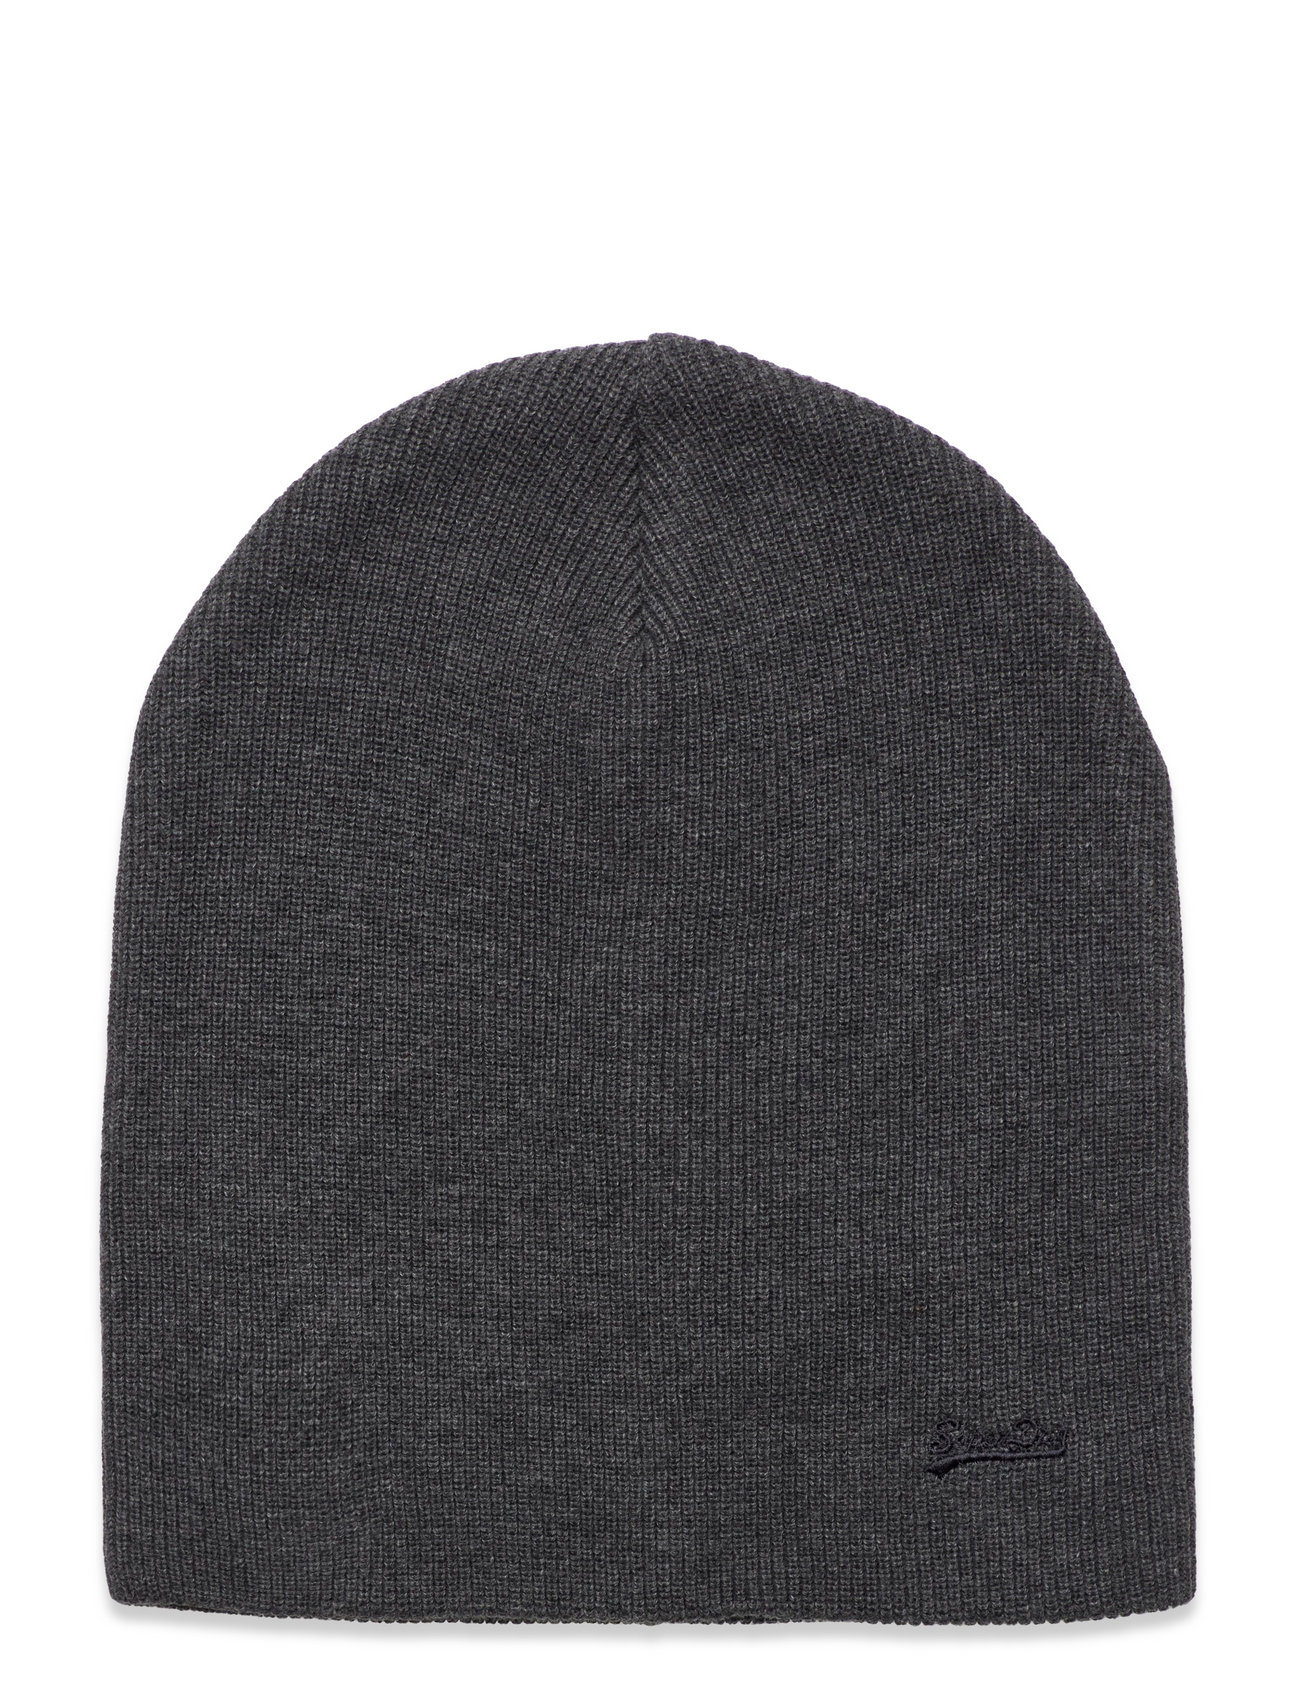 Superdry Knitted Logo Beanie Hat Hats 